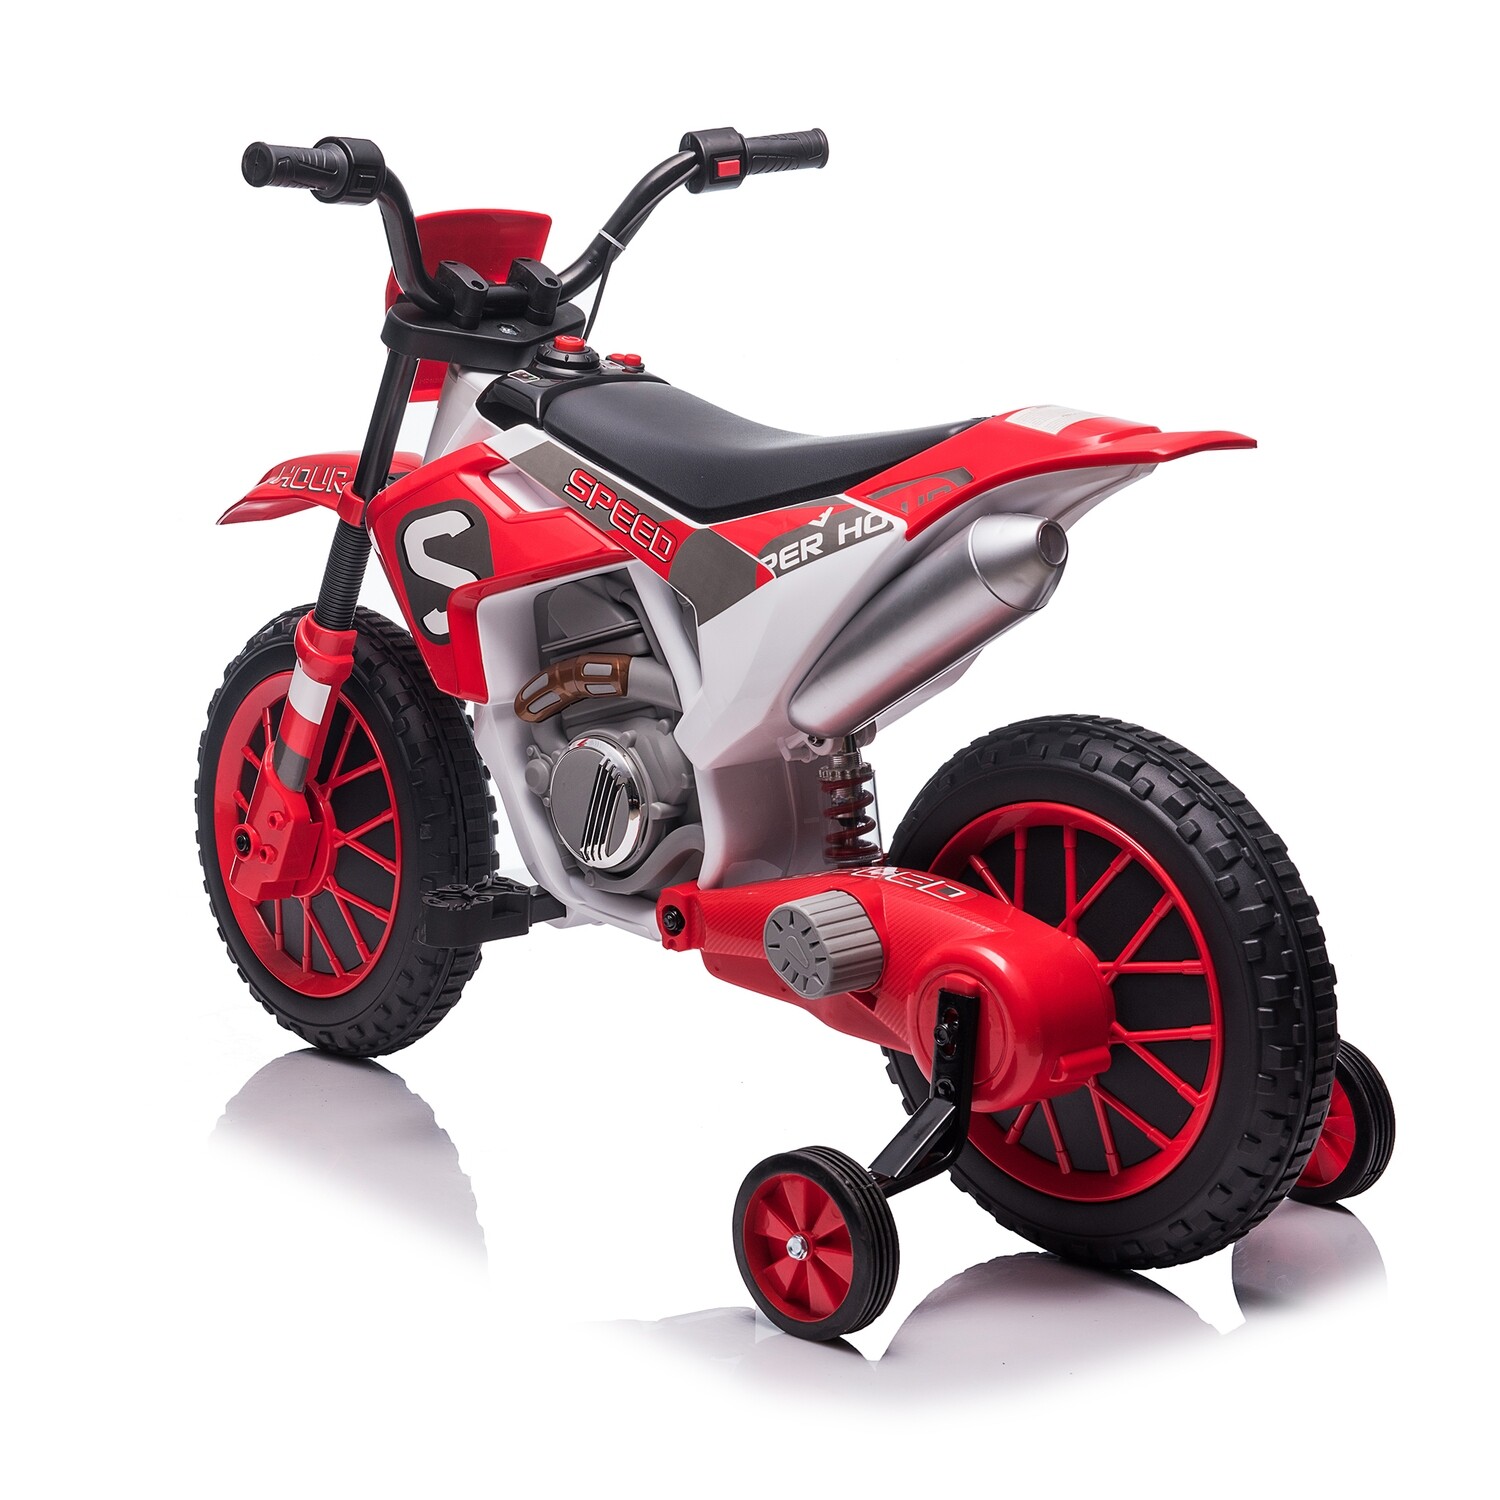 12V Kids Ride on Toy Motorcycle, Electric Motor Toy Bike with Training Wheels for Kids 3-6, Red, Options: Red+Polypropylene